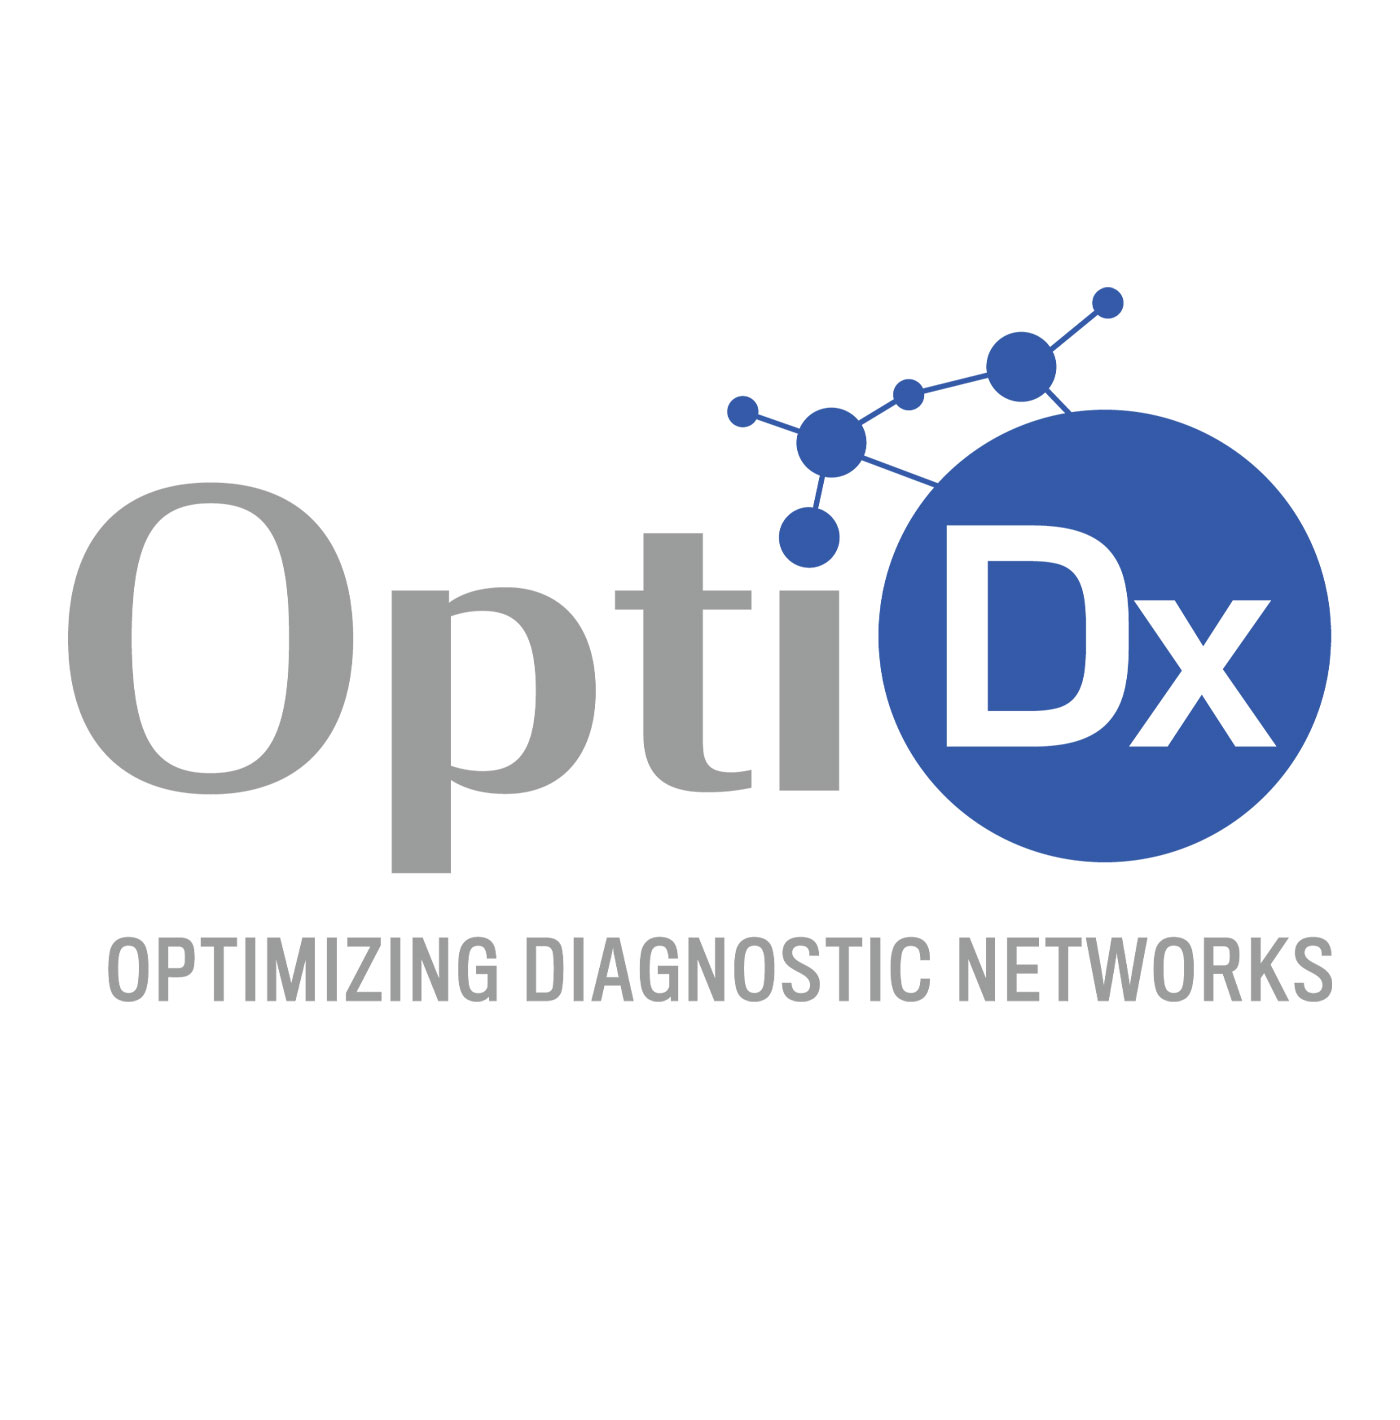 OptiDx is a web-based, open-access tool to conduct diagnostic network optimization and route optimization analysis, for any disease.